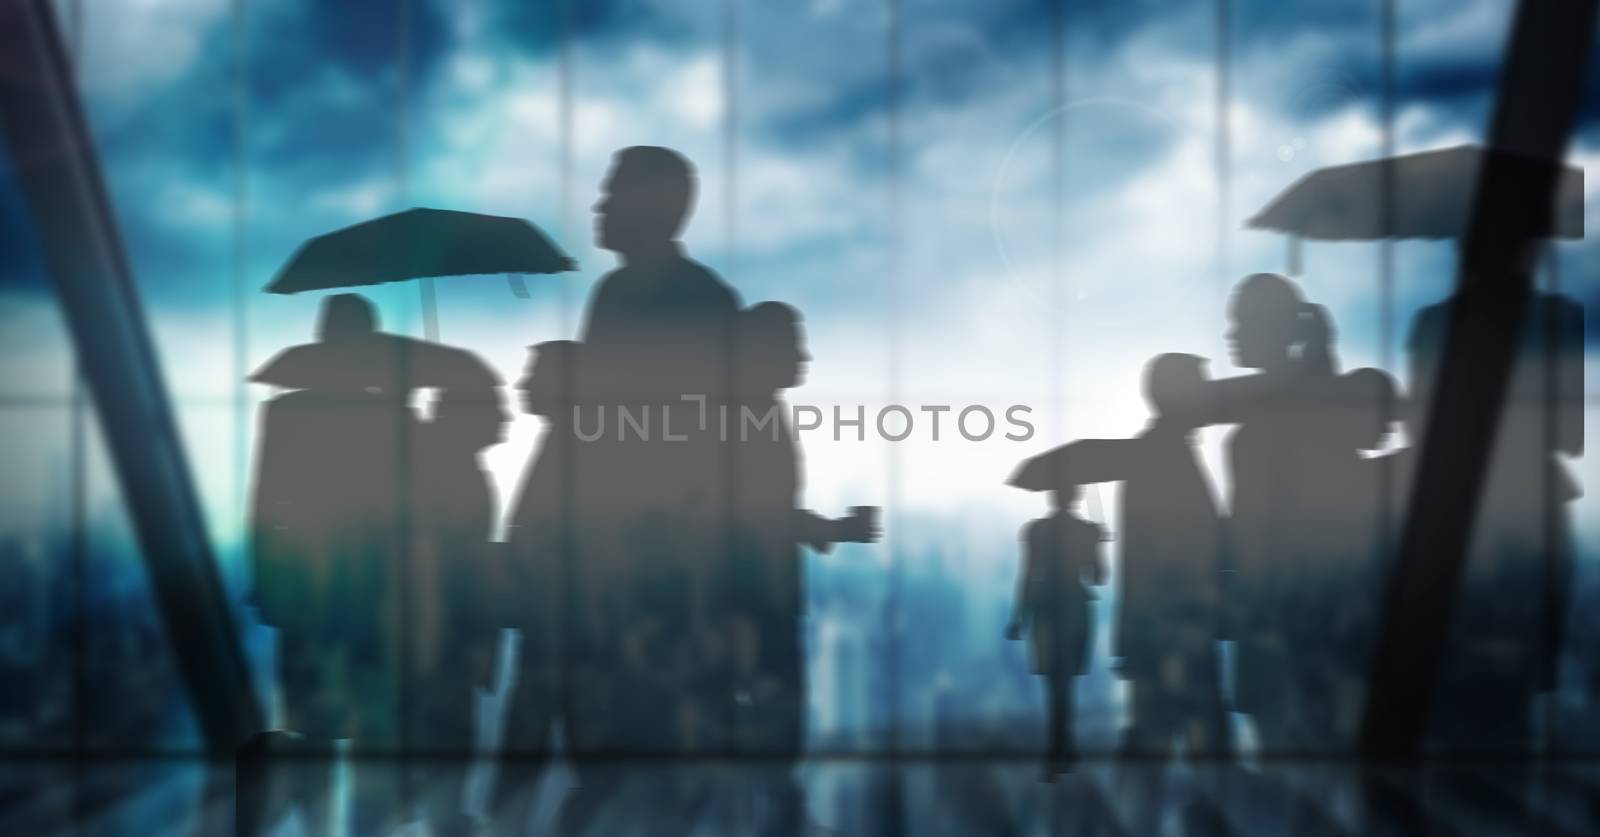 Silhouette of group of people with umbrellas over windows transition by Wavebreakmedia